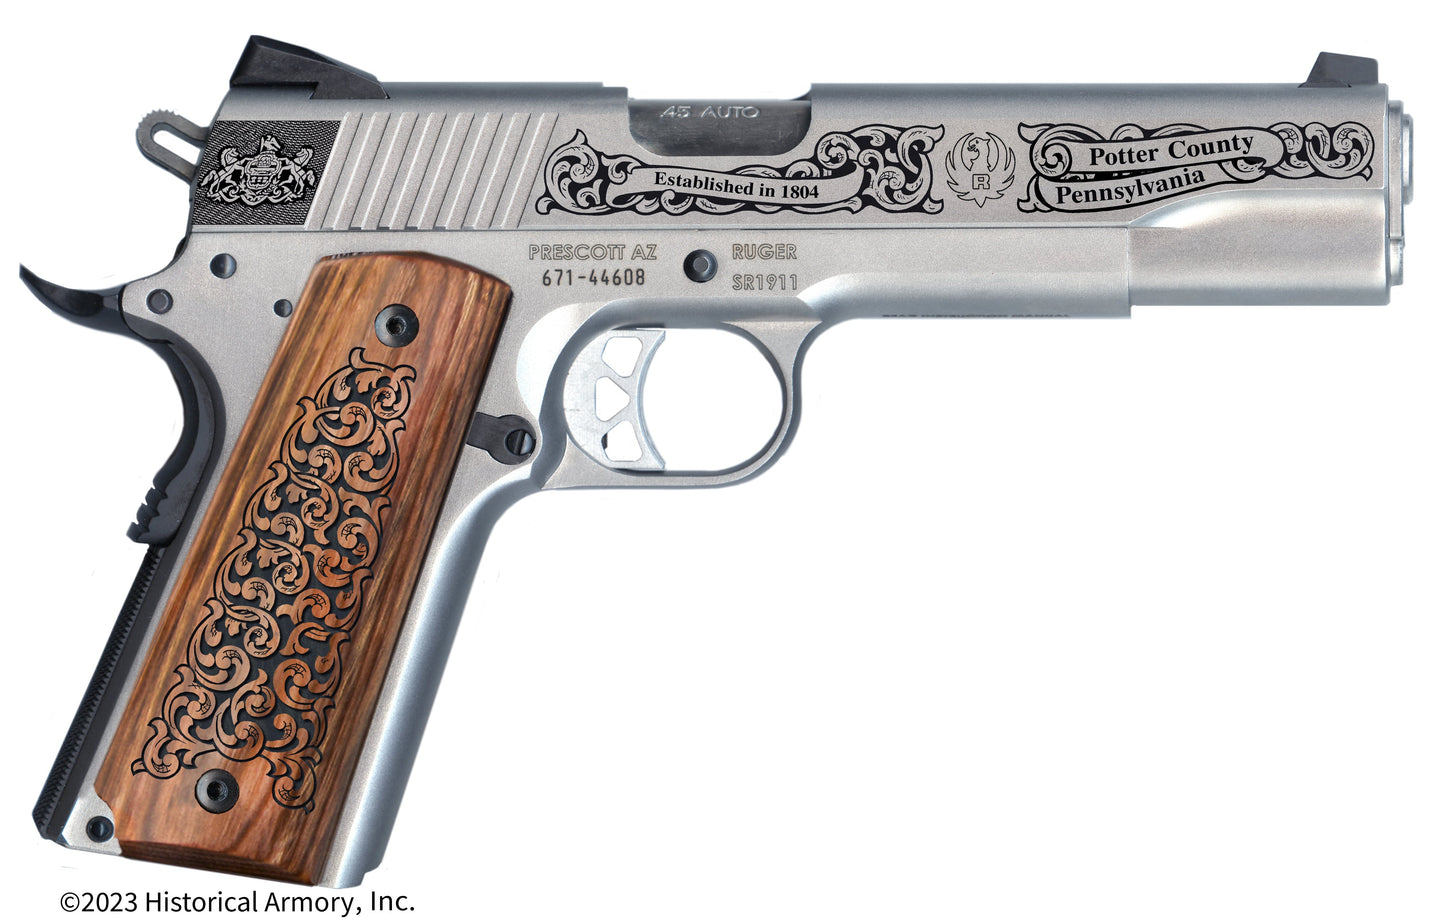 Potter County Pennsylvania Engraved .45 Auto Ruger 1911